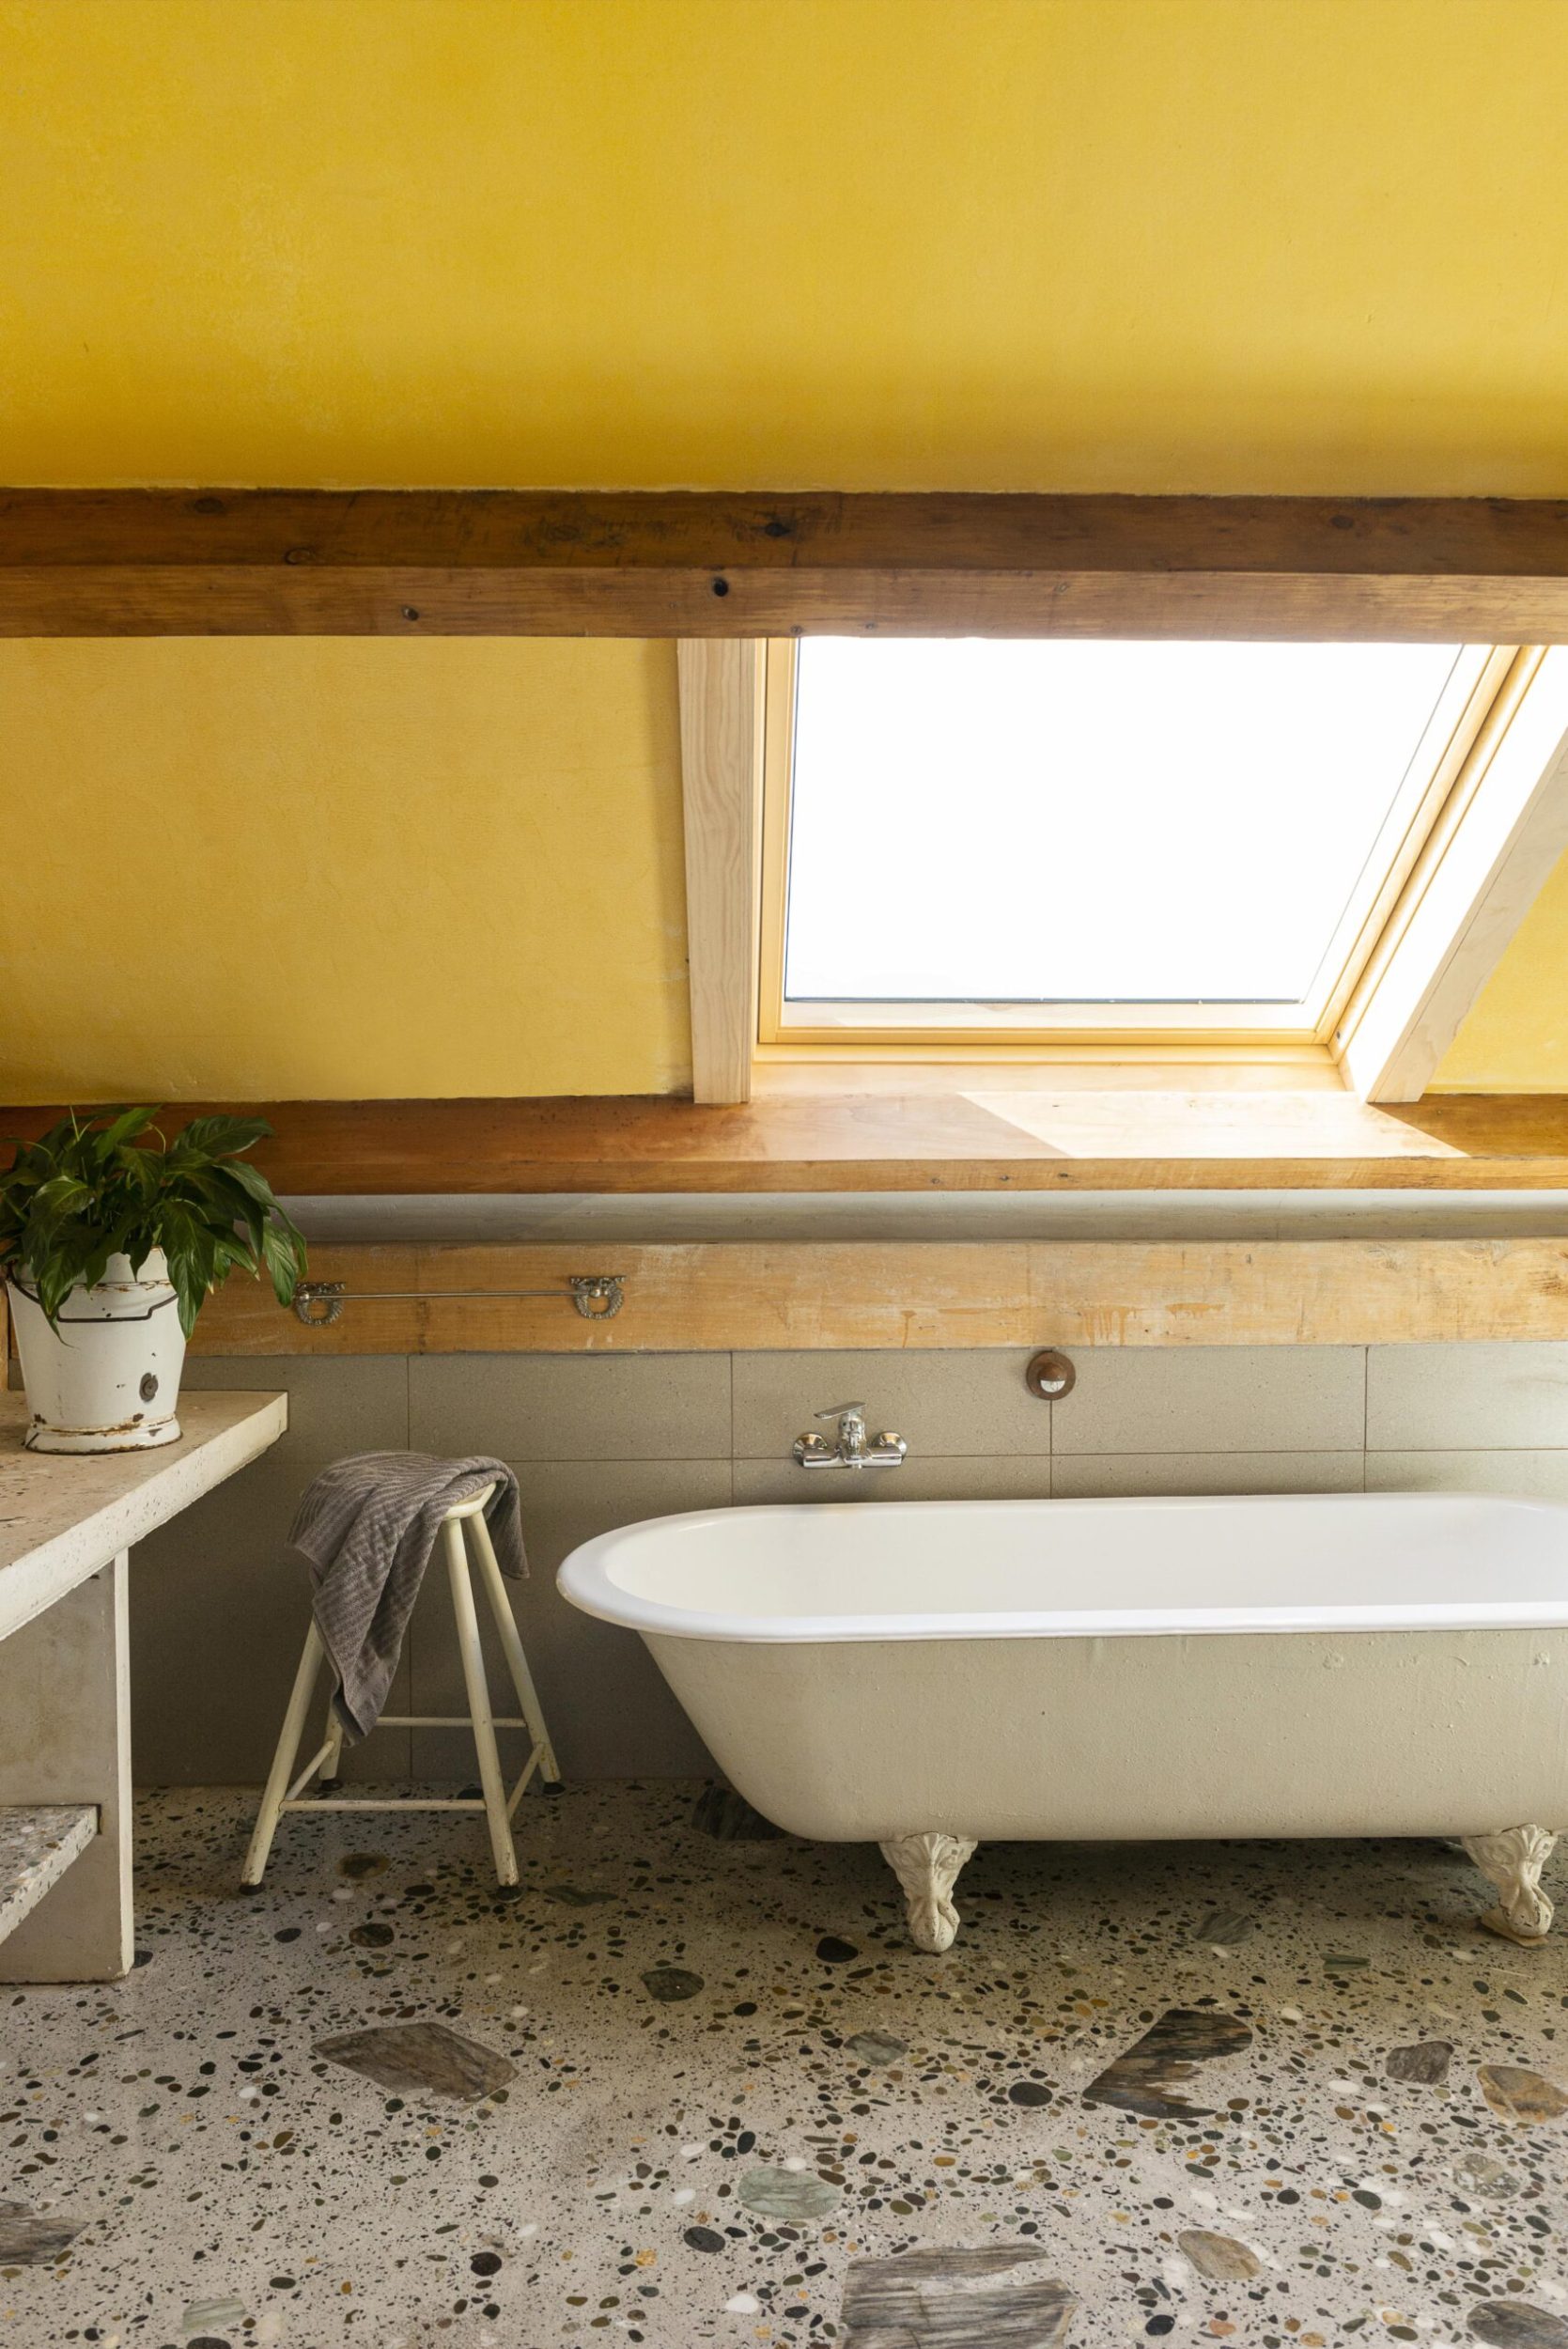 A bathroom with yellow walls, grey floors, a claw foot tub, angled ceiling and a ceiling night